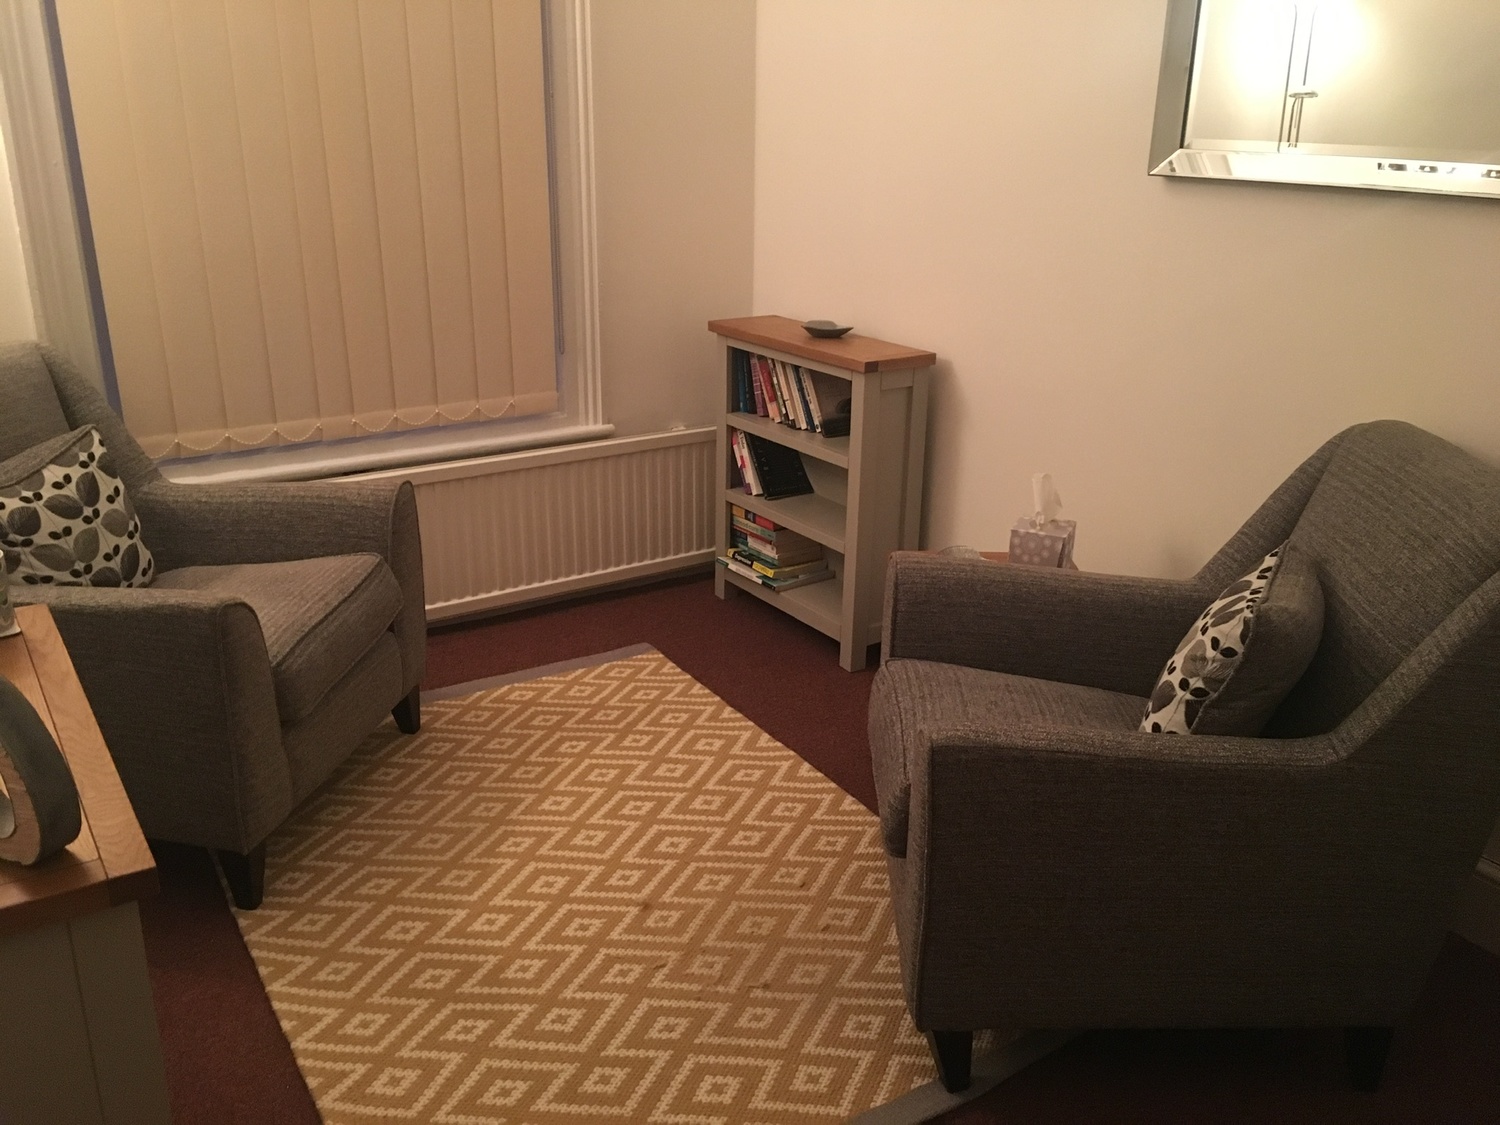 Gallery Photo of Comfortable, non-clinical, therapy room